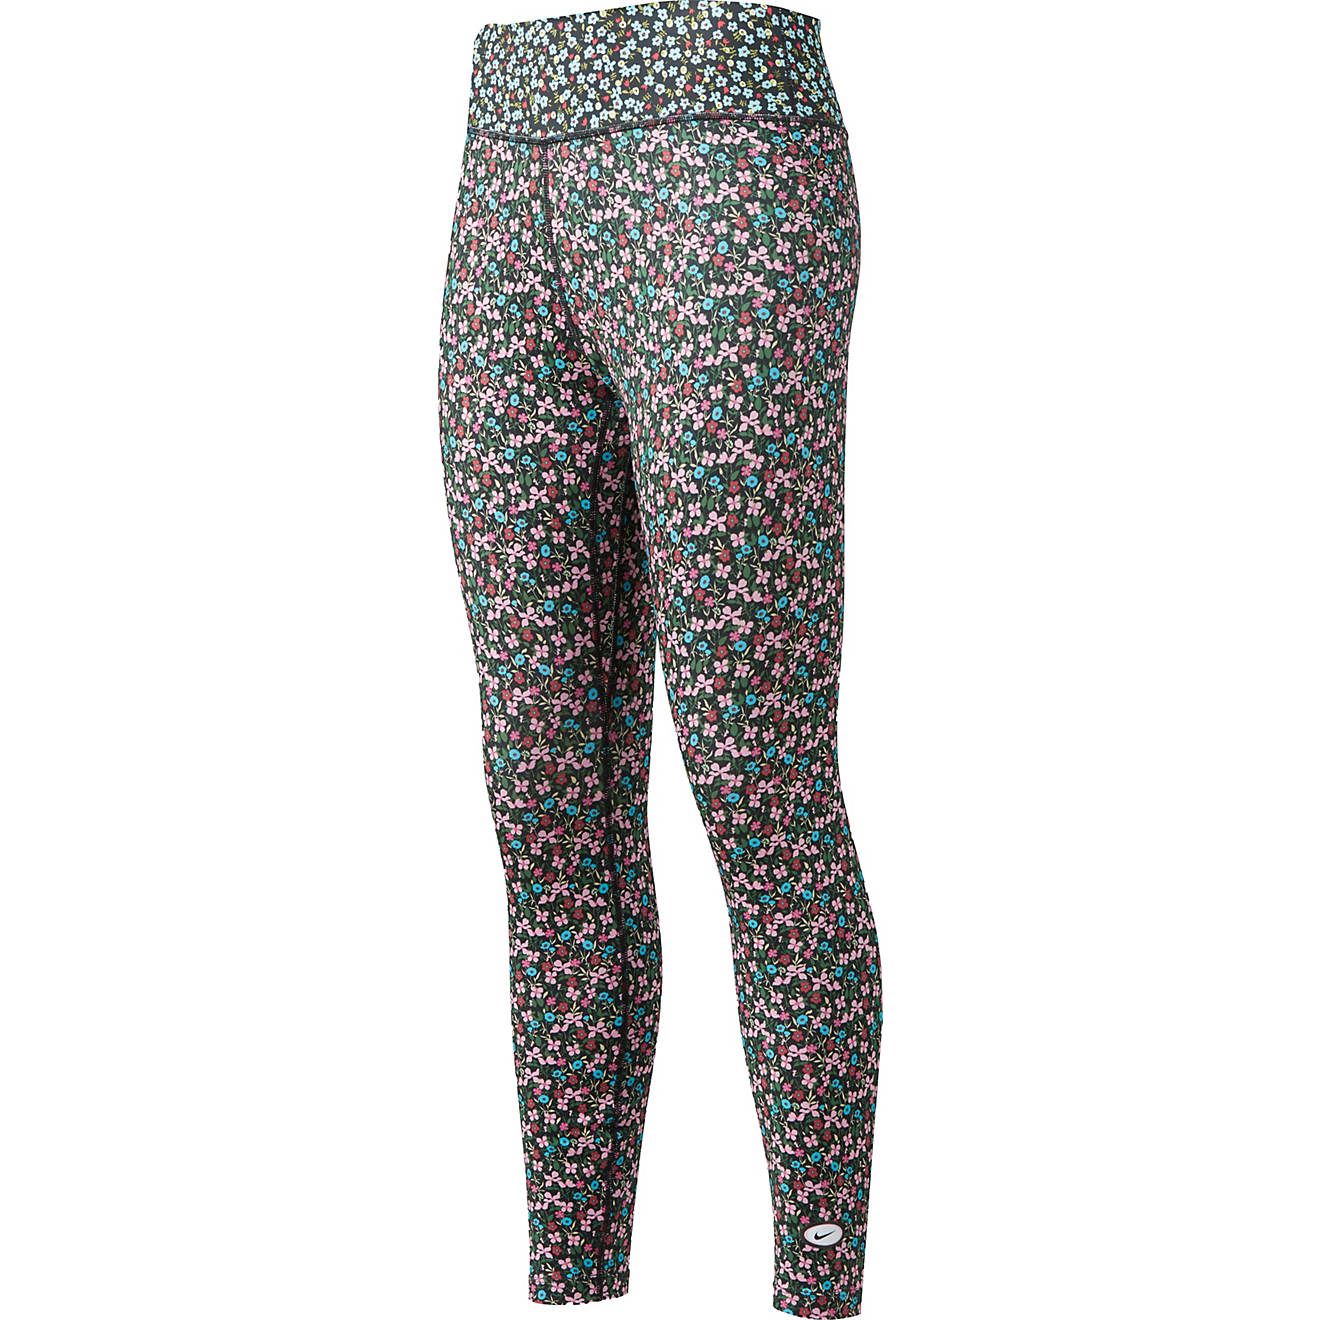 Nike Women's One 7/8 Femme Tights | Academy Sports + Outdoor Affiliate